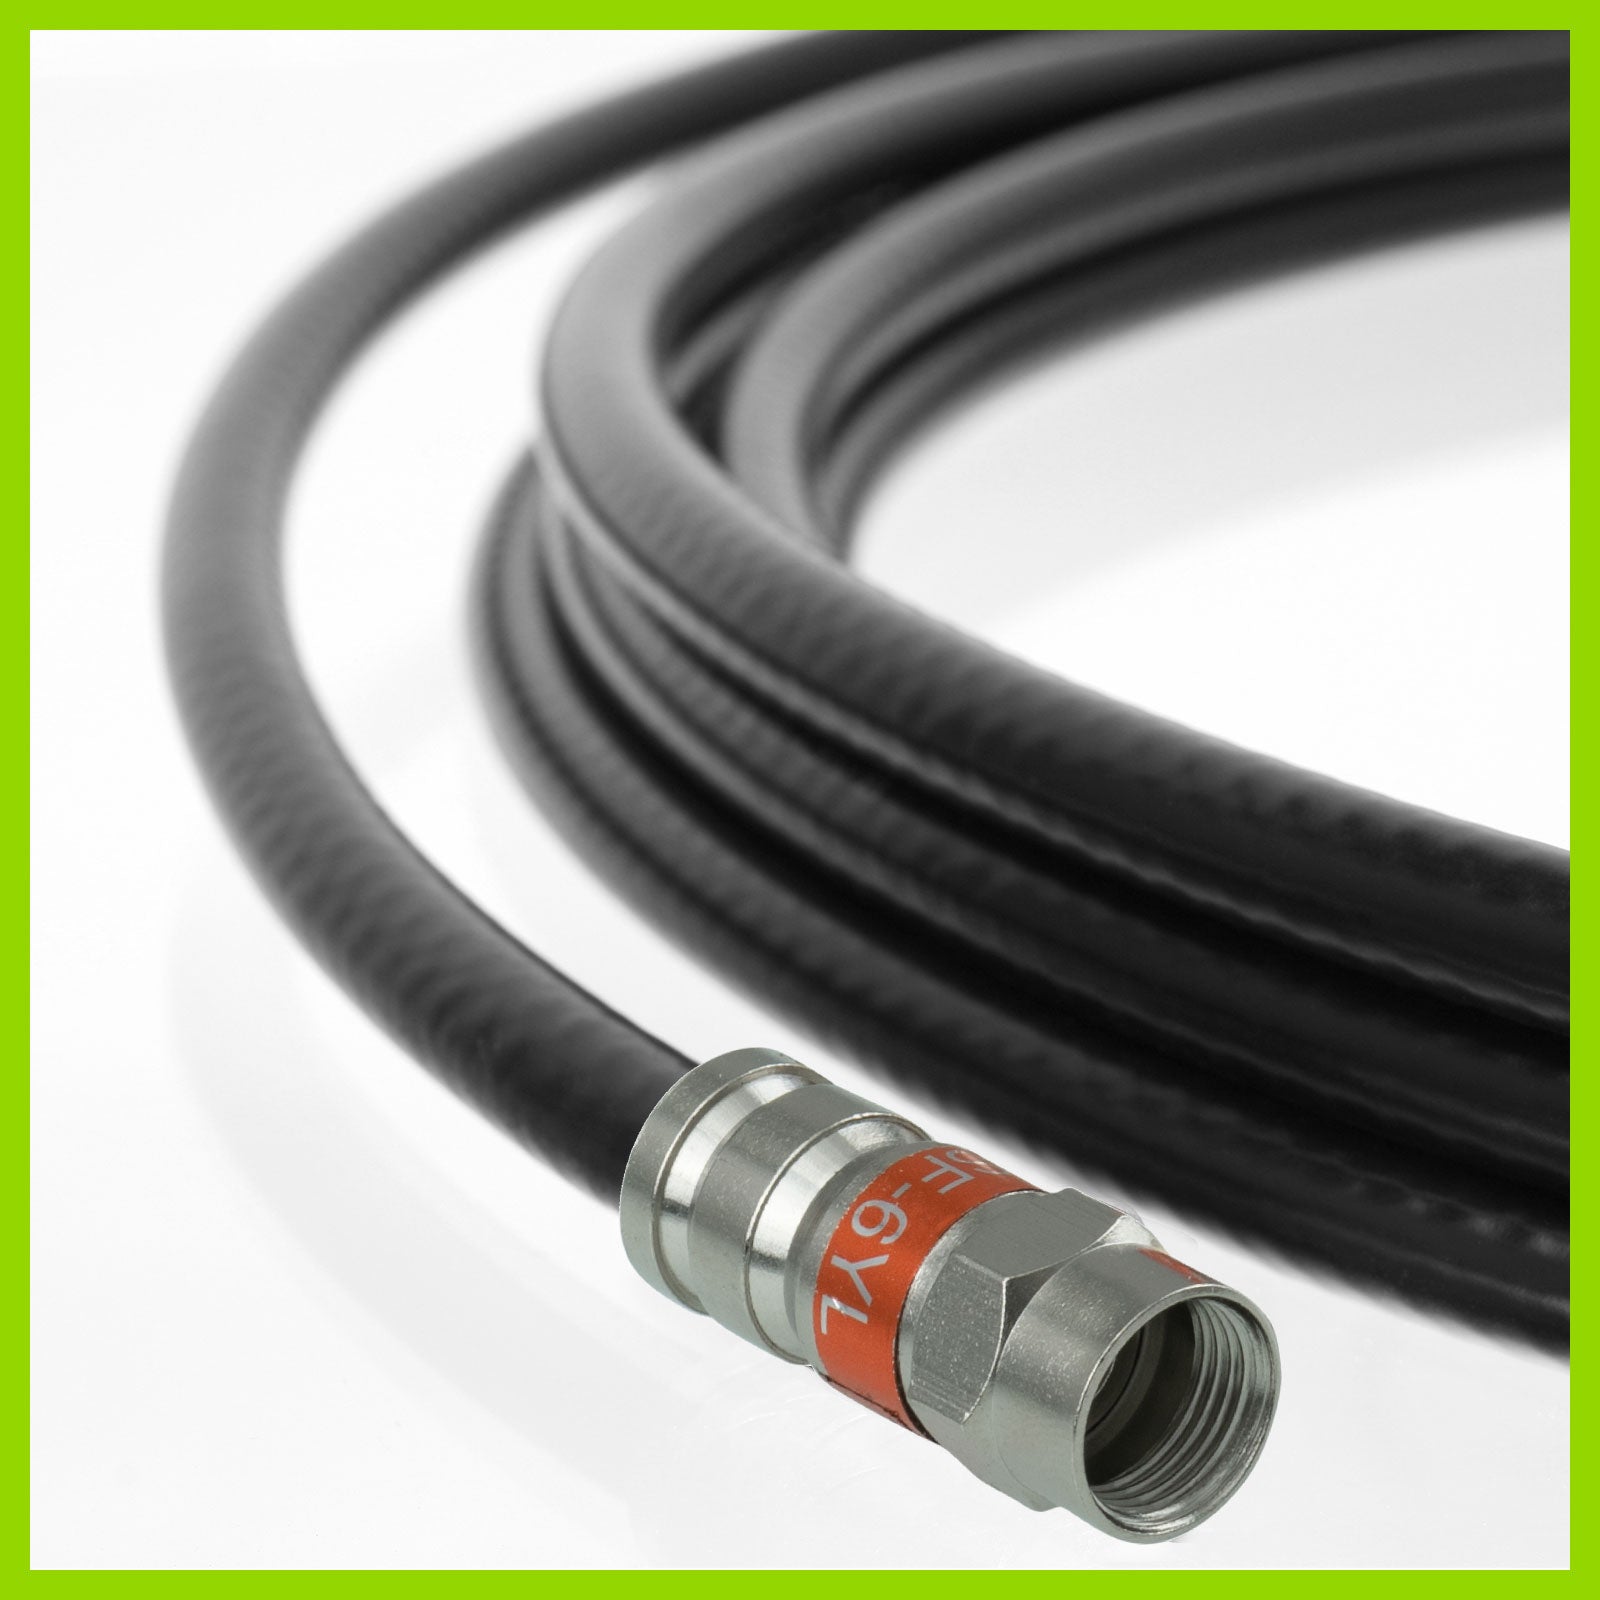 Waterproof Compression Plug for RG6 Cable